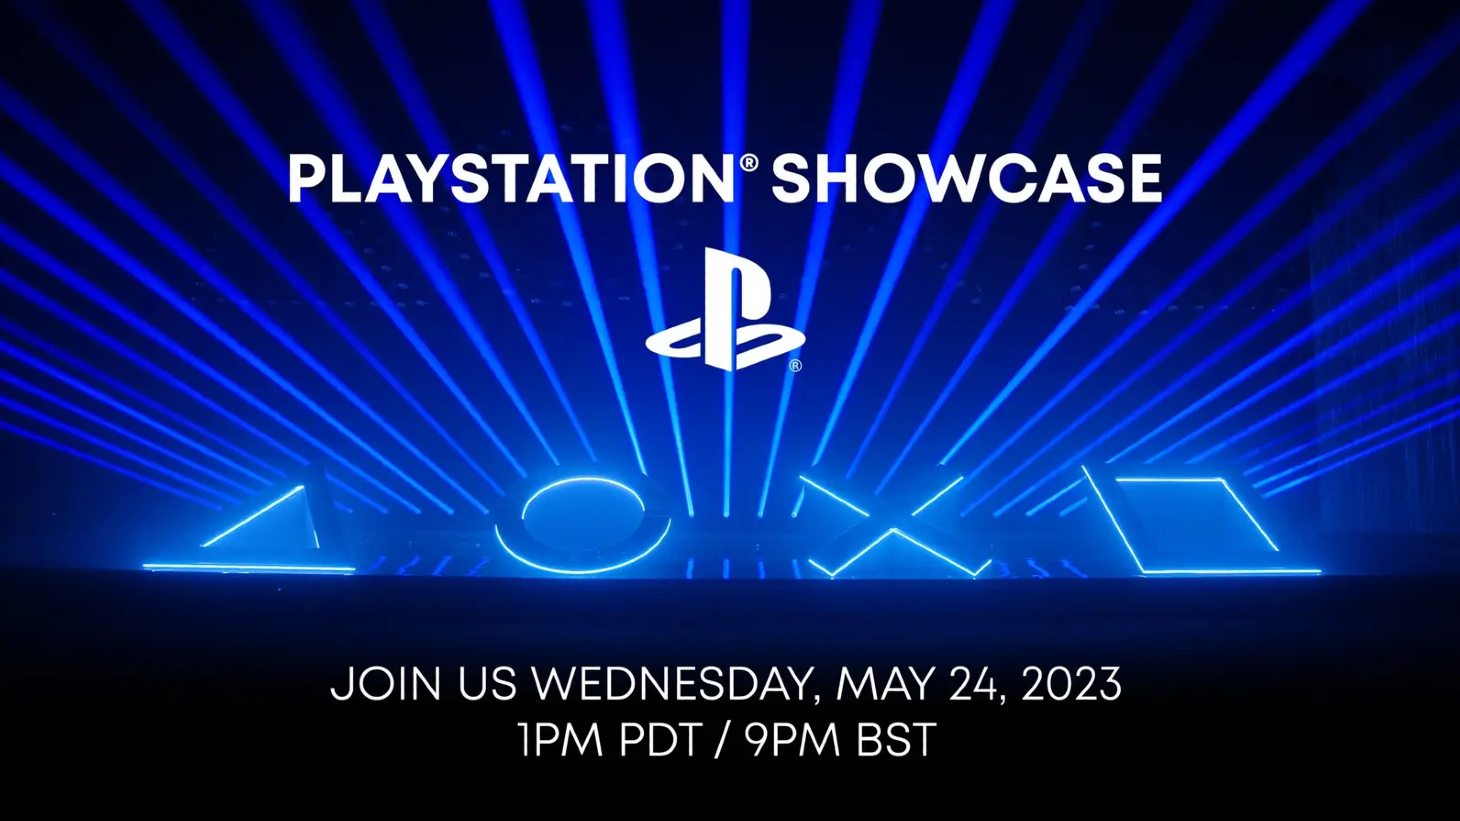 PlayStation Showcase 2023: The logo and time can be seen